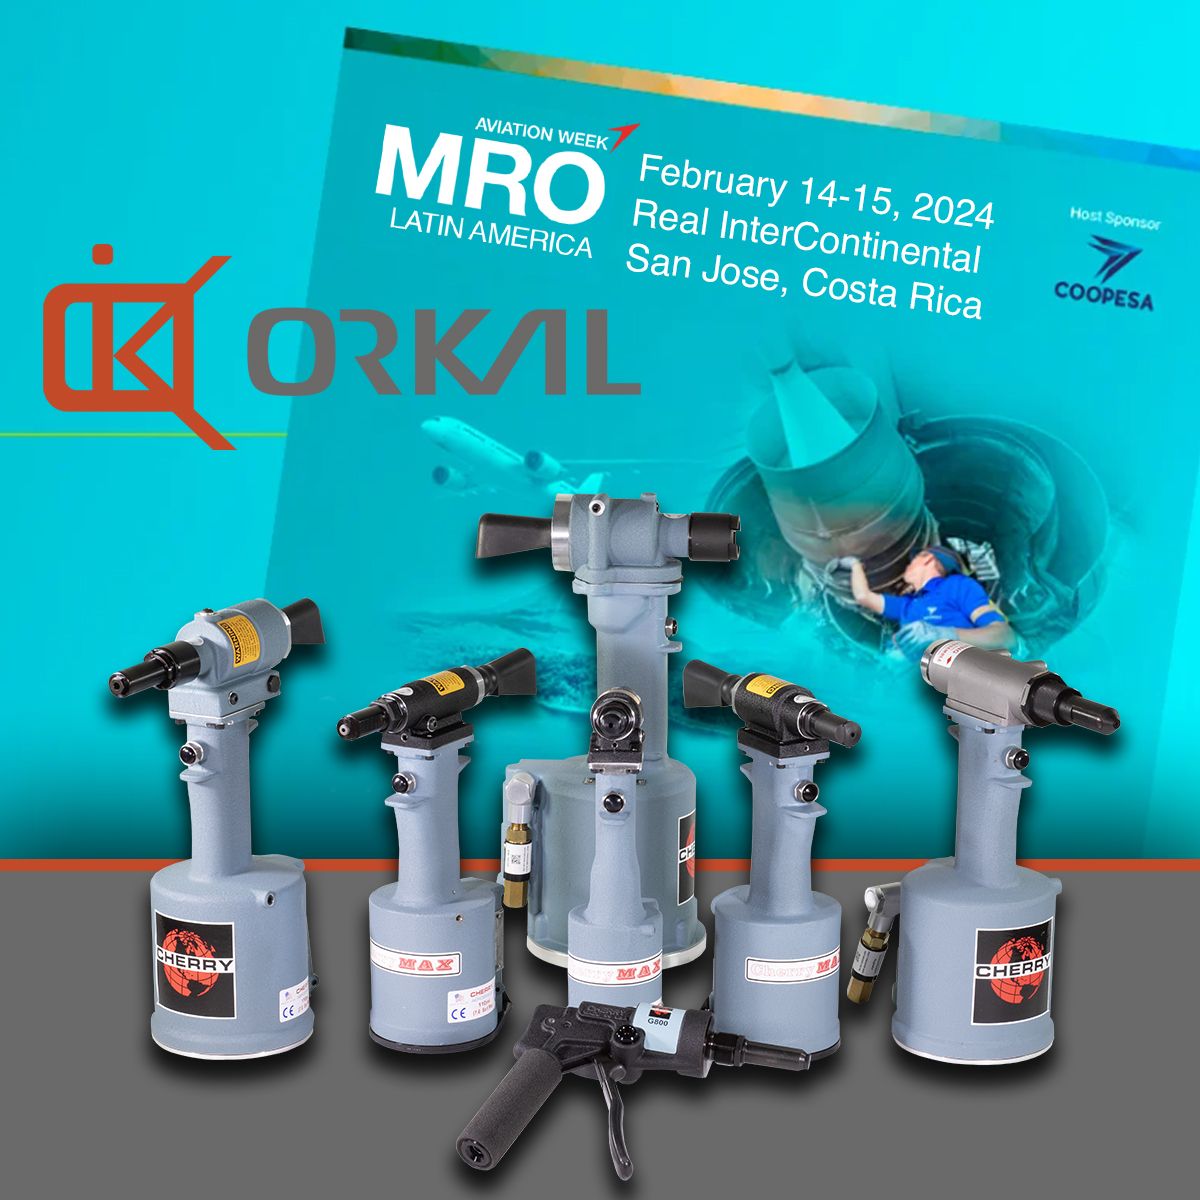 promotional image for mro week latin america featuring a display of industrial torque wrenches, set against a backdrop with event details.